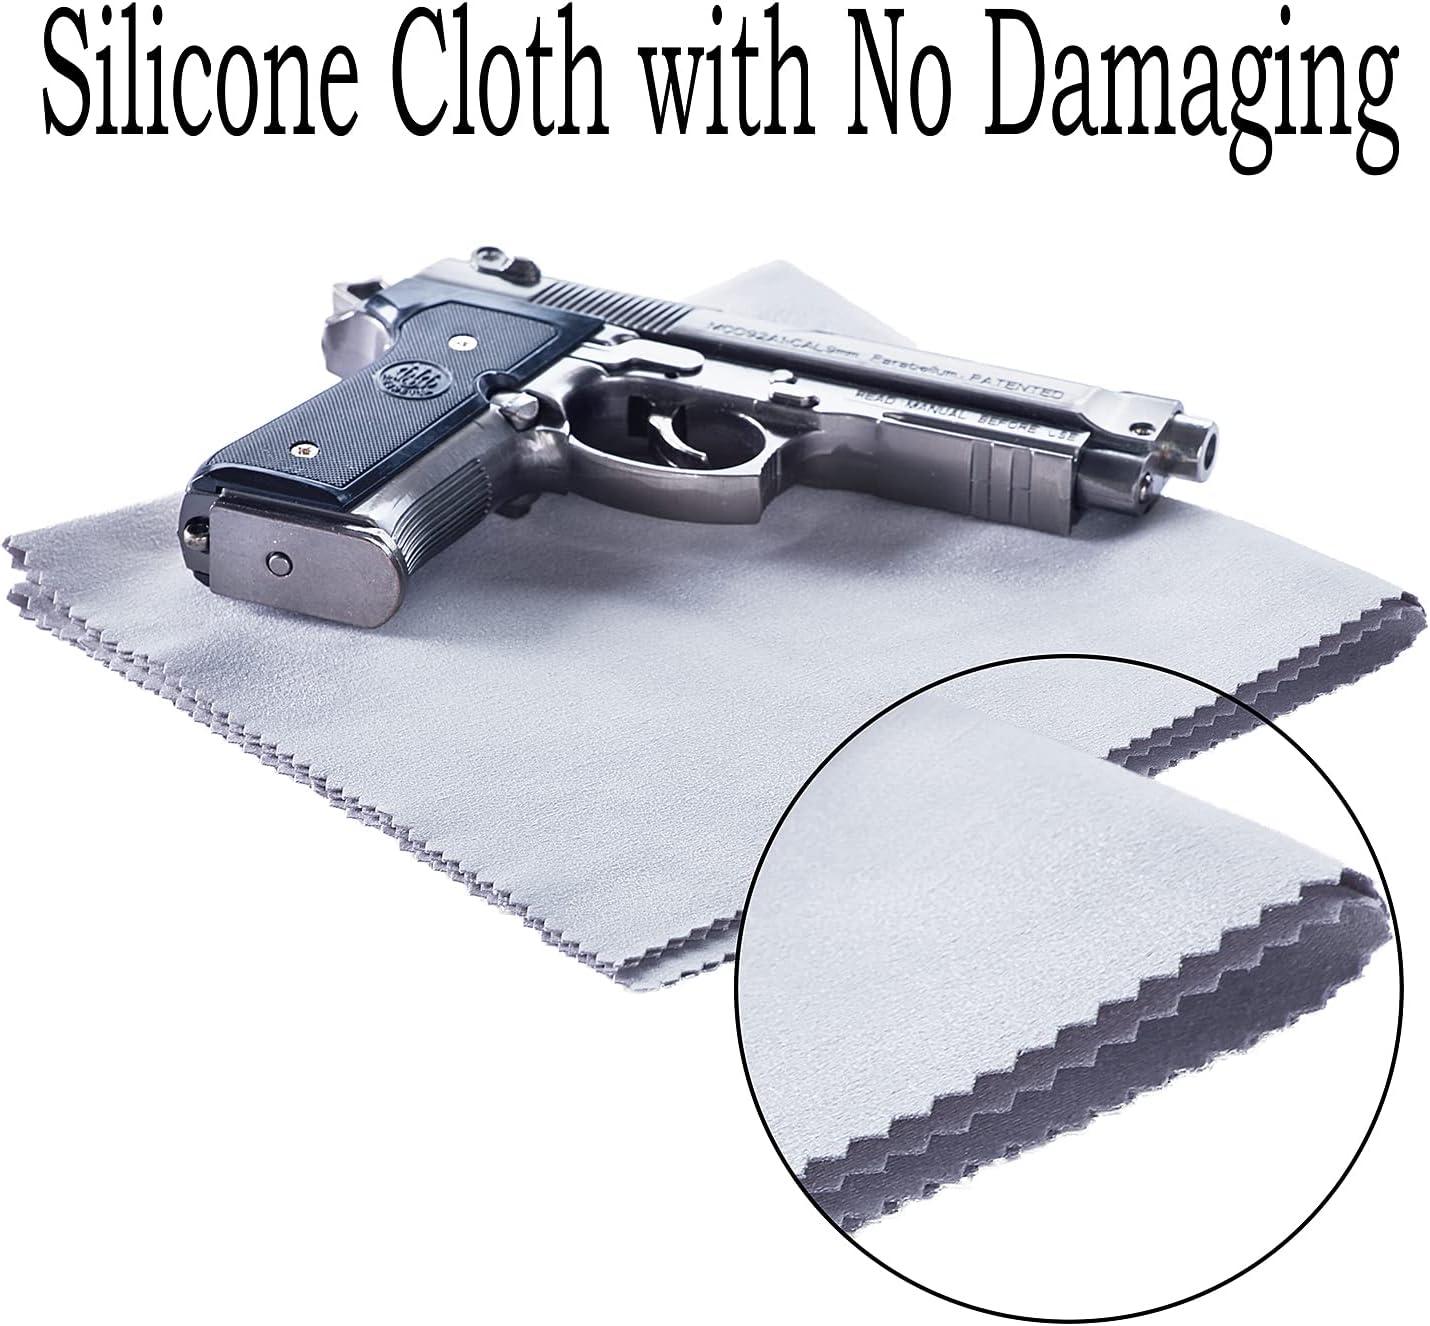 1000PCS Gun Cleaning Patches, Brifire Gun Cleaning Cloth with